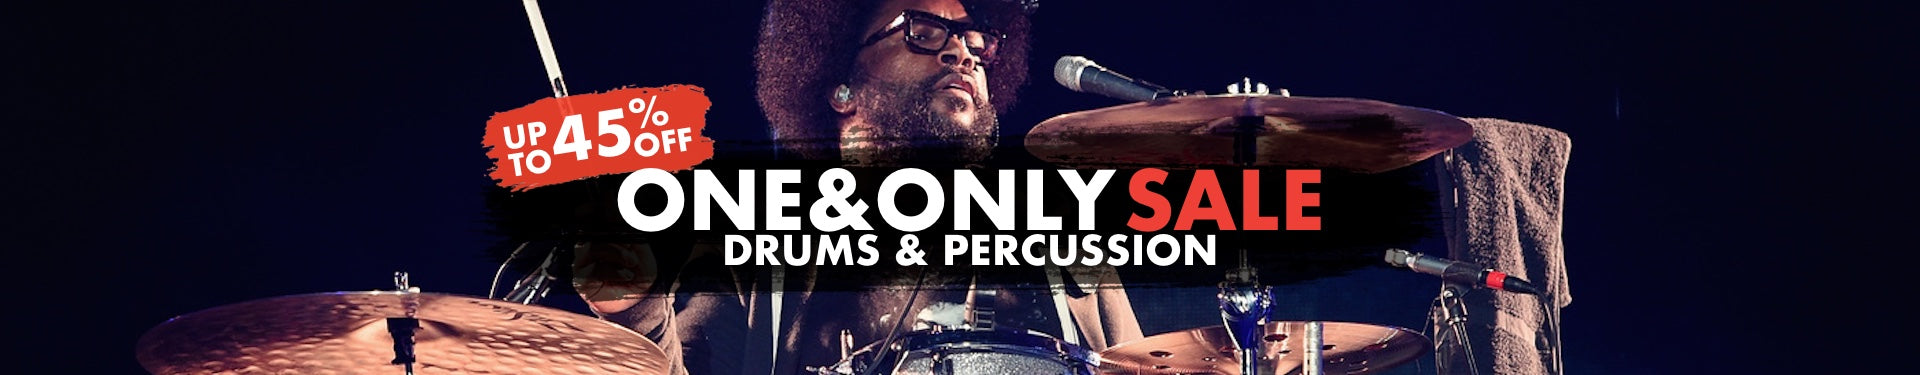 One & Only Drums & Percussion Sale